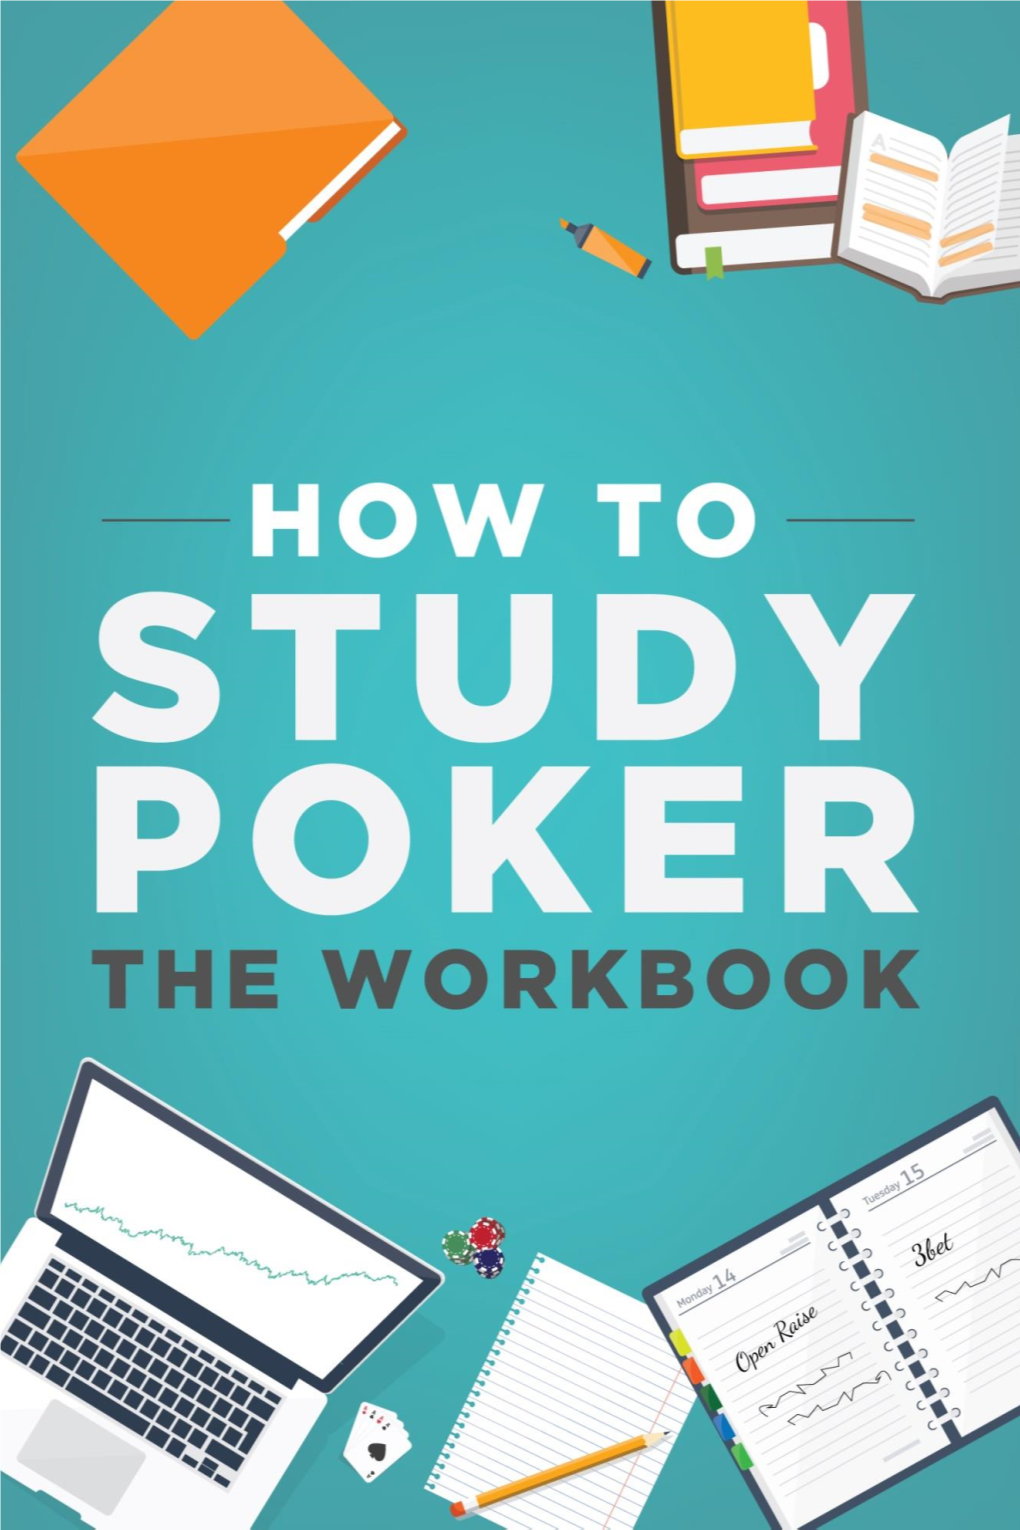 PDF’ That Details How I Learn from Poker Books